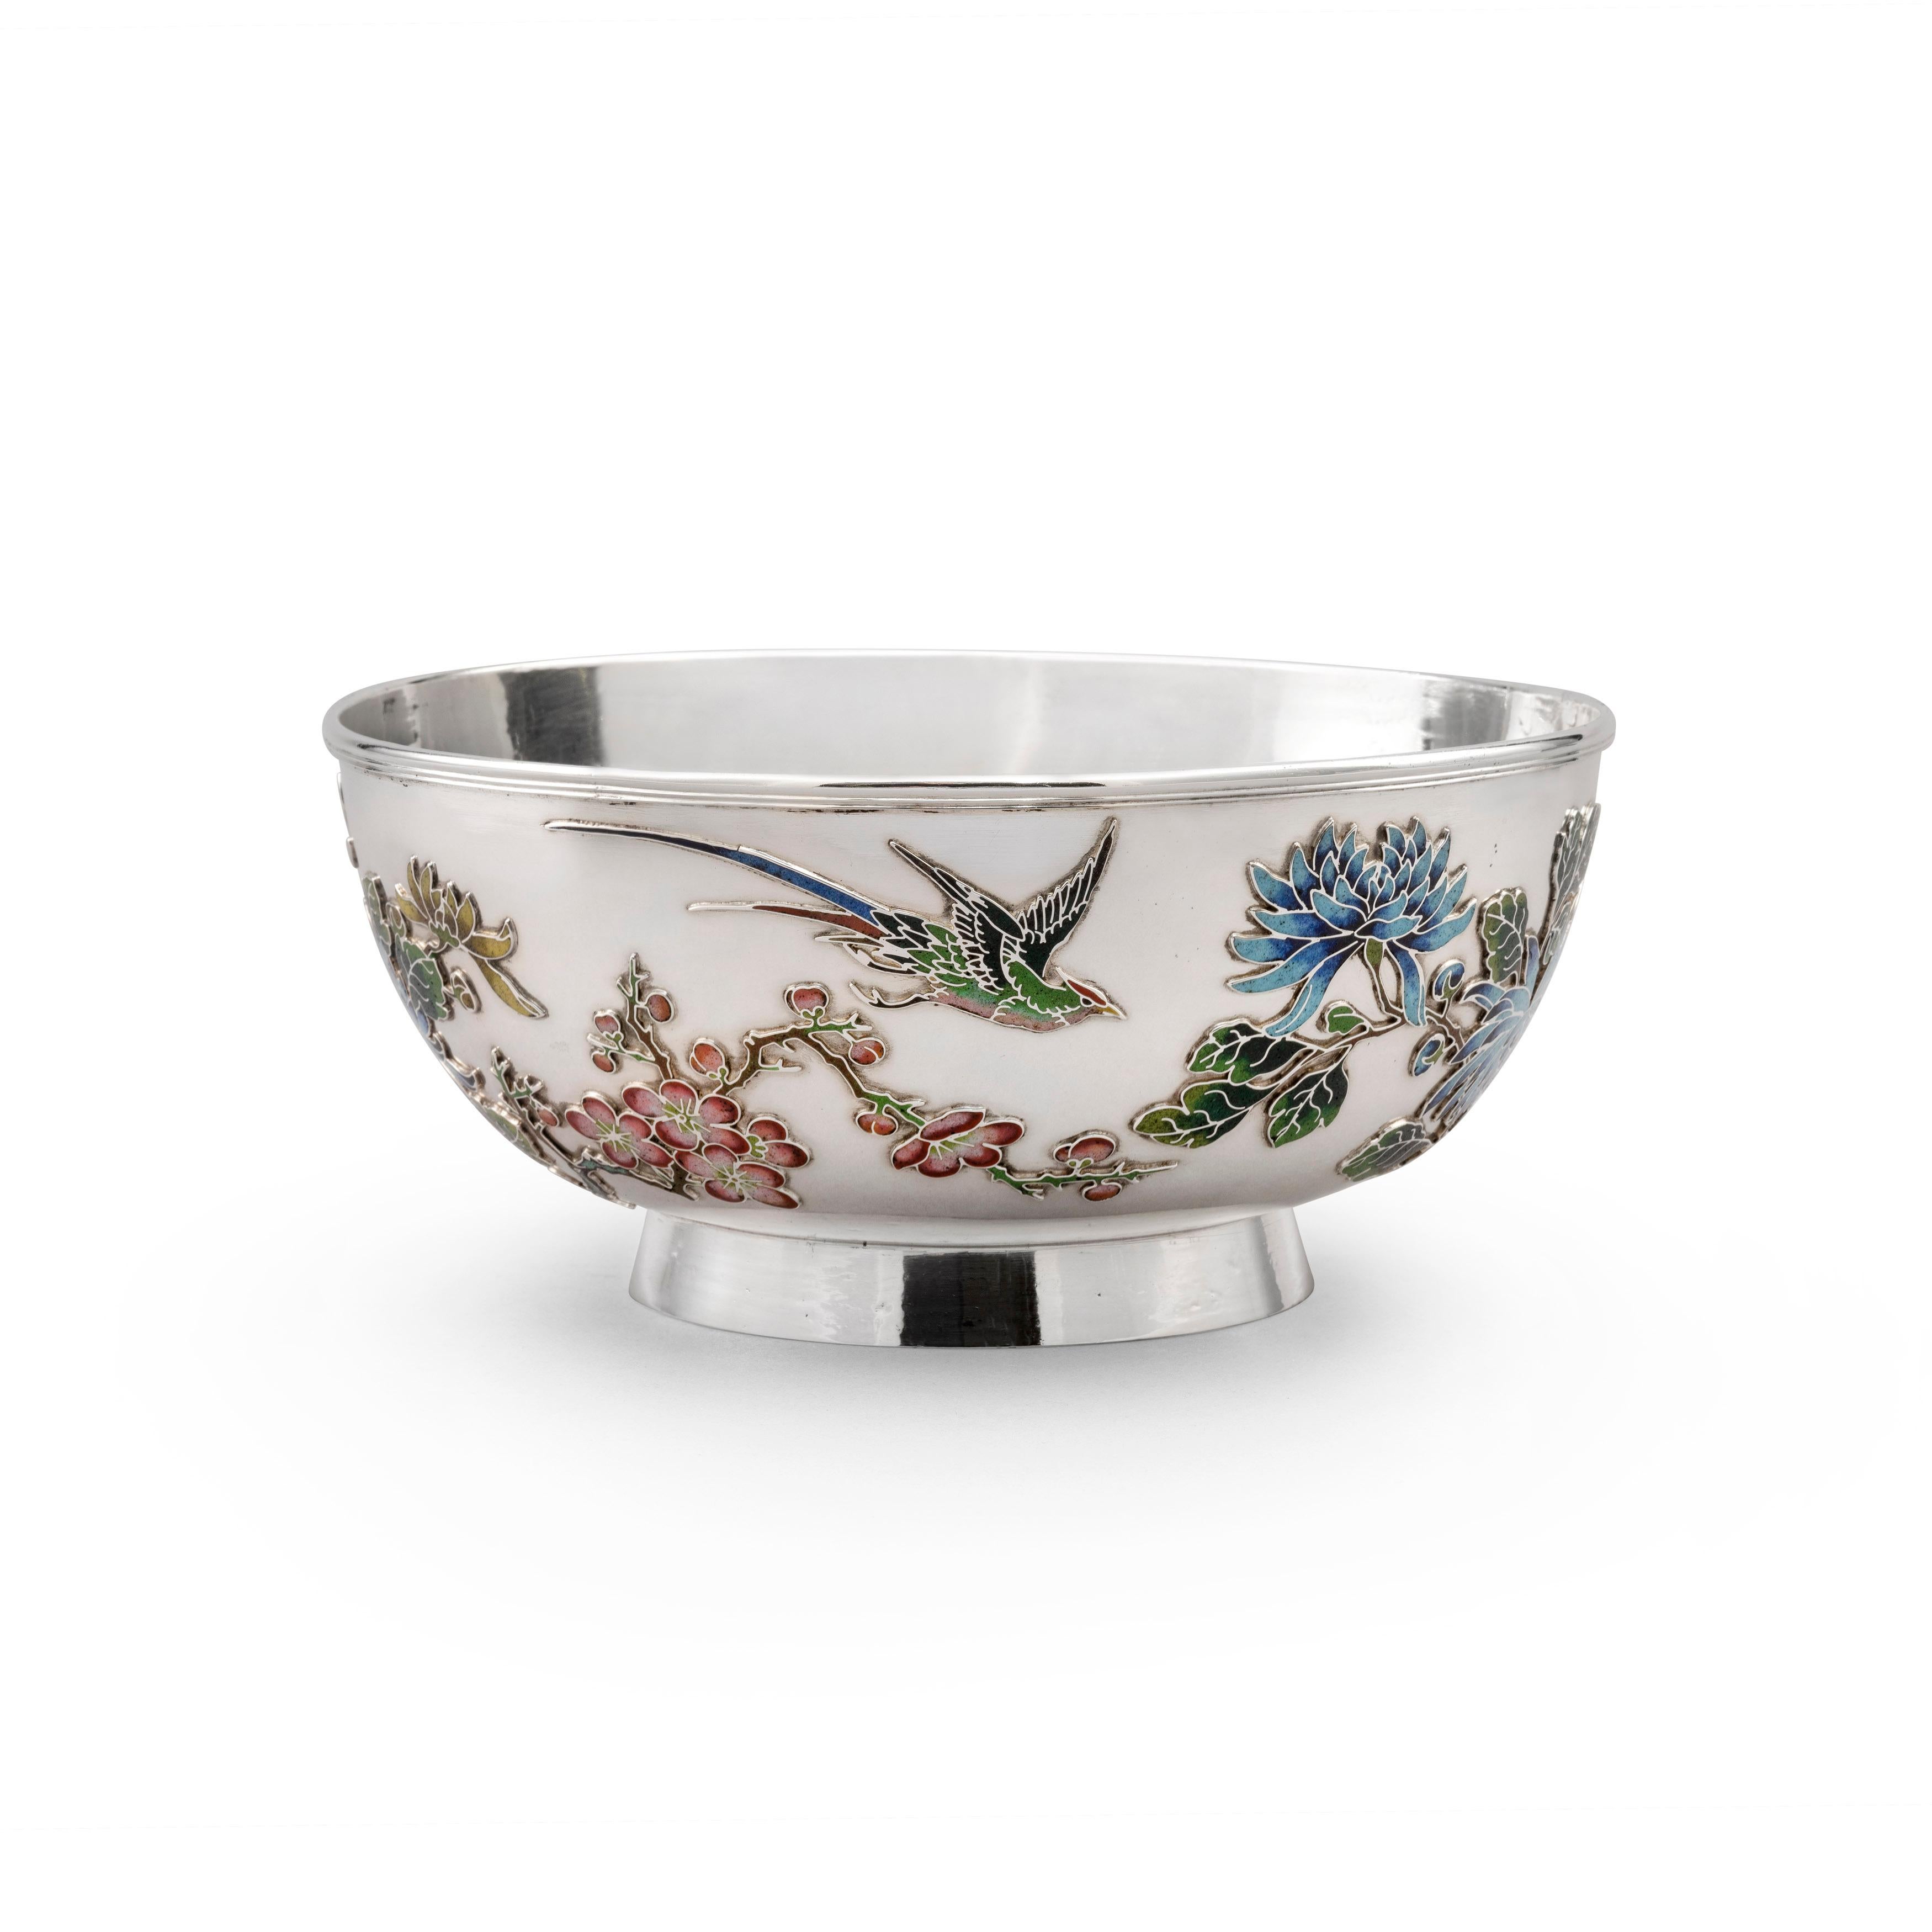 A rare and exquisite Chinese Export silver & enamel bowl, made in Shanghai around 1895 by Huang Qui Ji, and retailed by the firm of Woshing.
The bowl features two birds flying above chrysanthemum and prunus, all applied with enamel of various